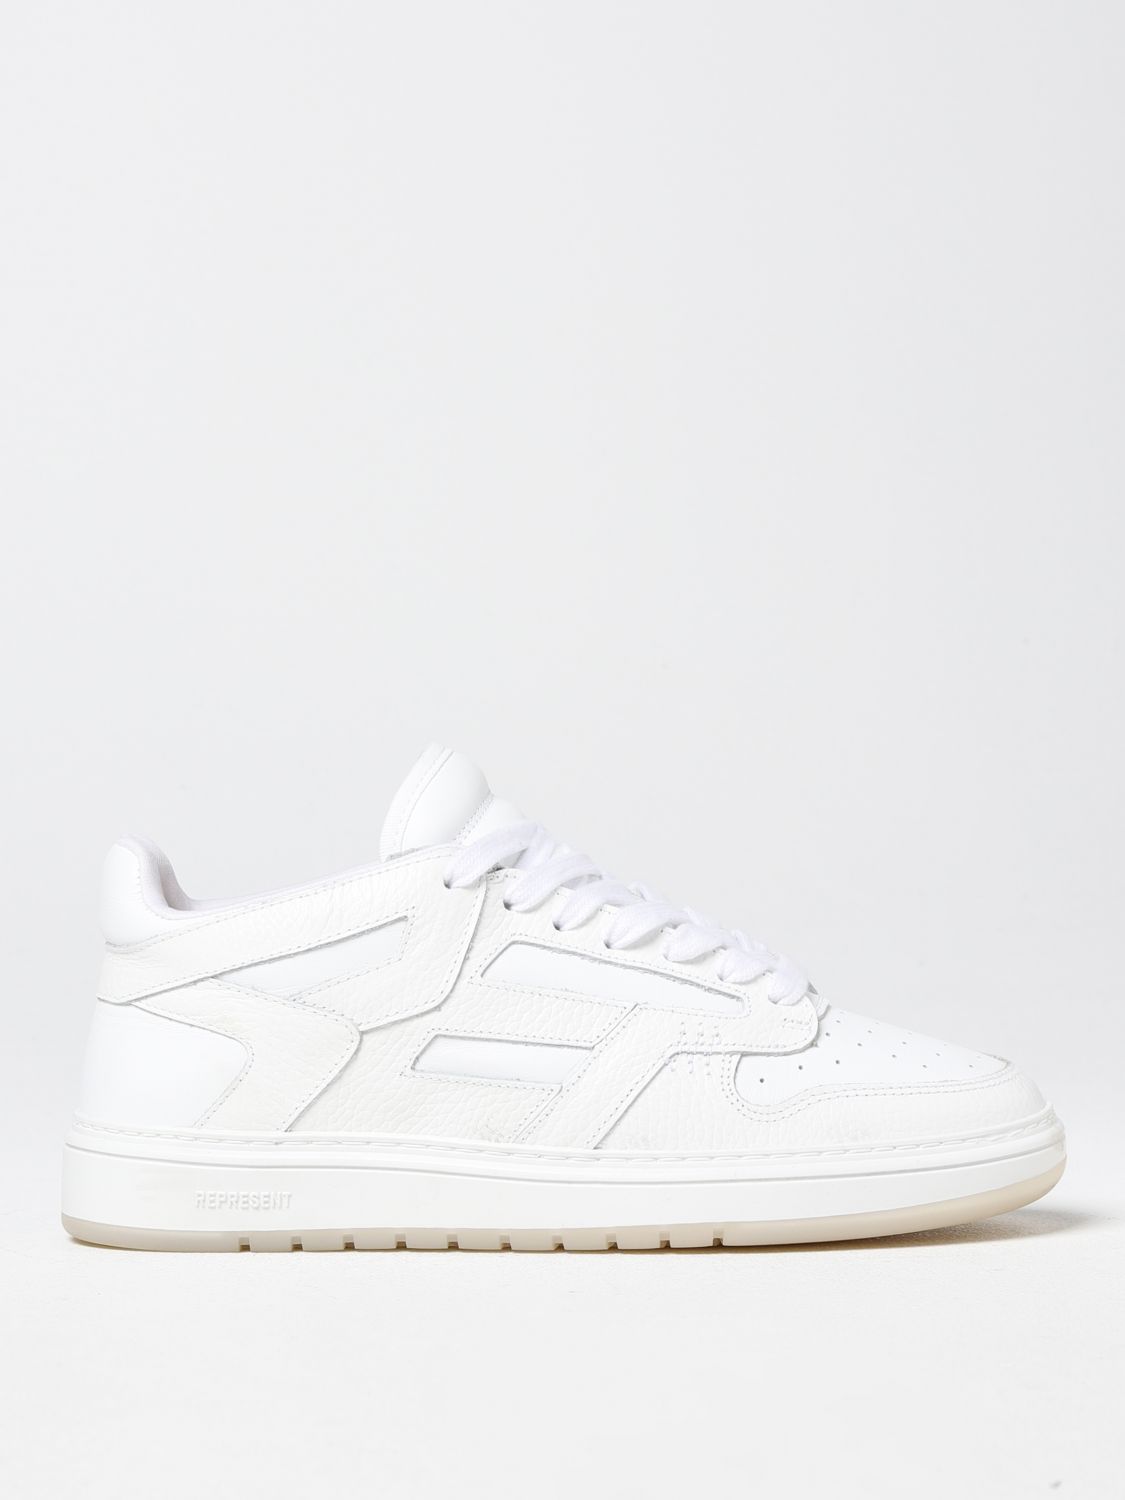 Represent Reptor Low Trainers In White